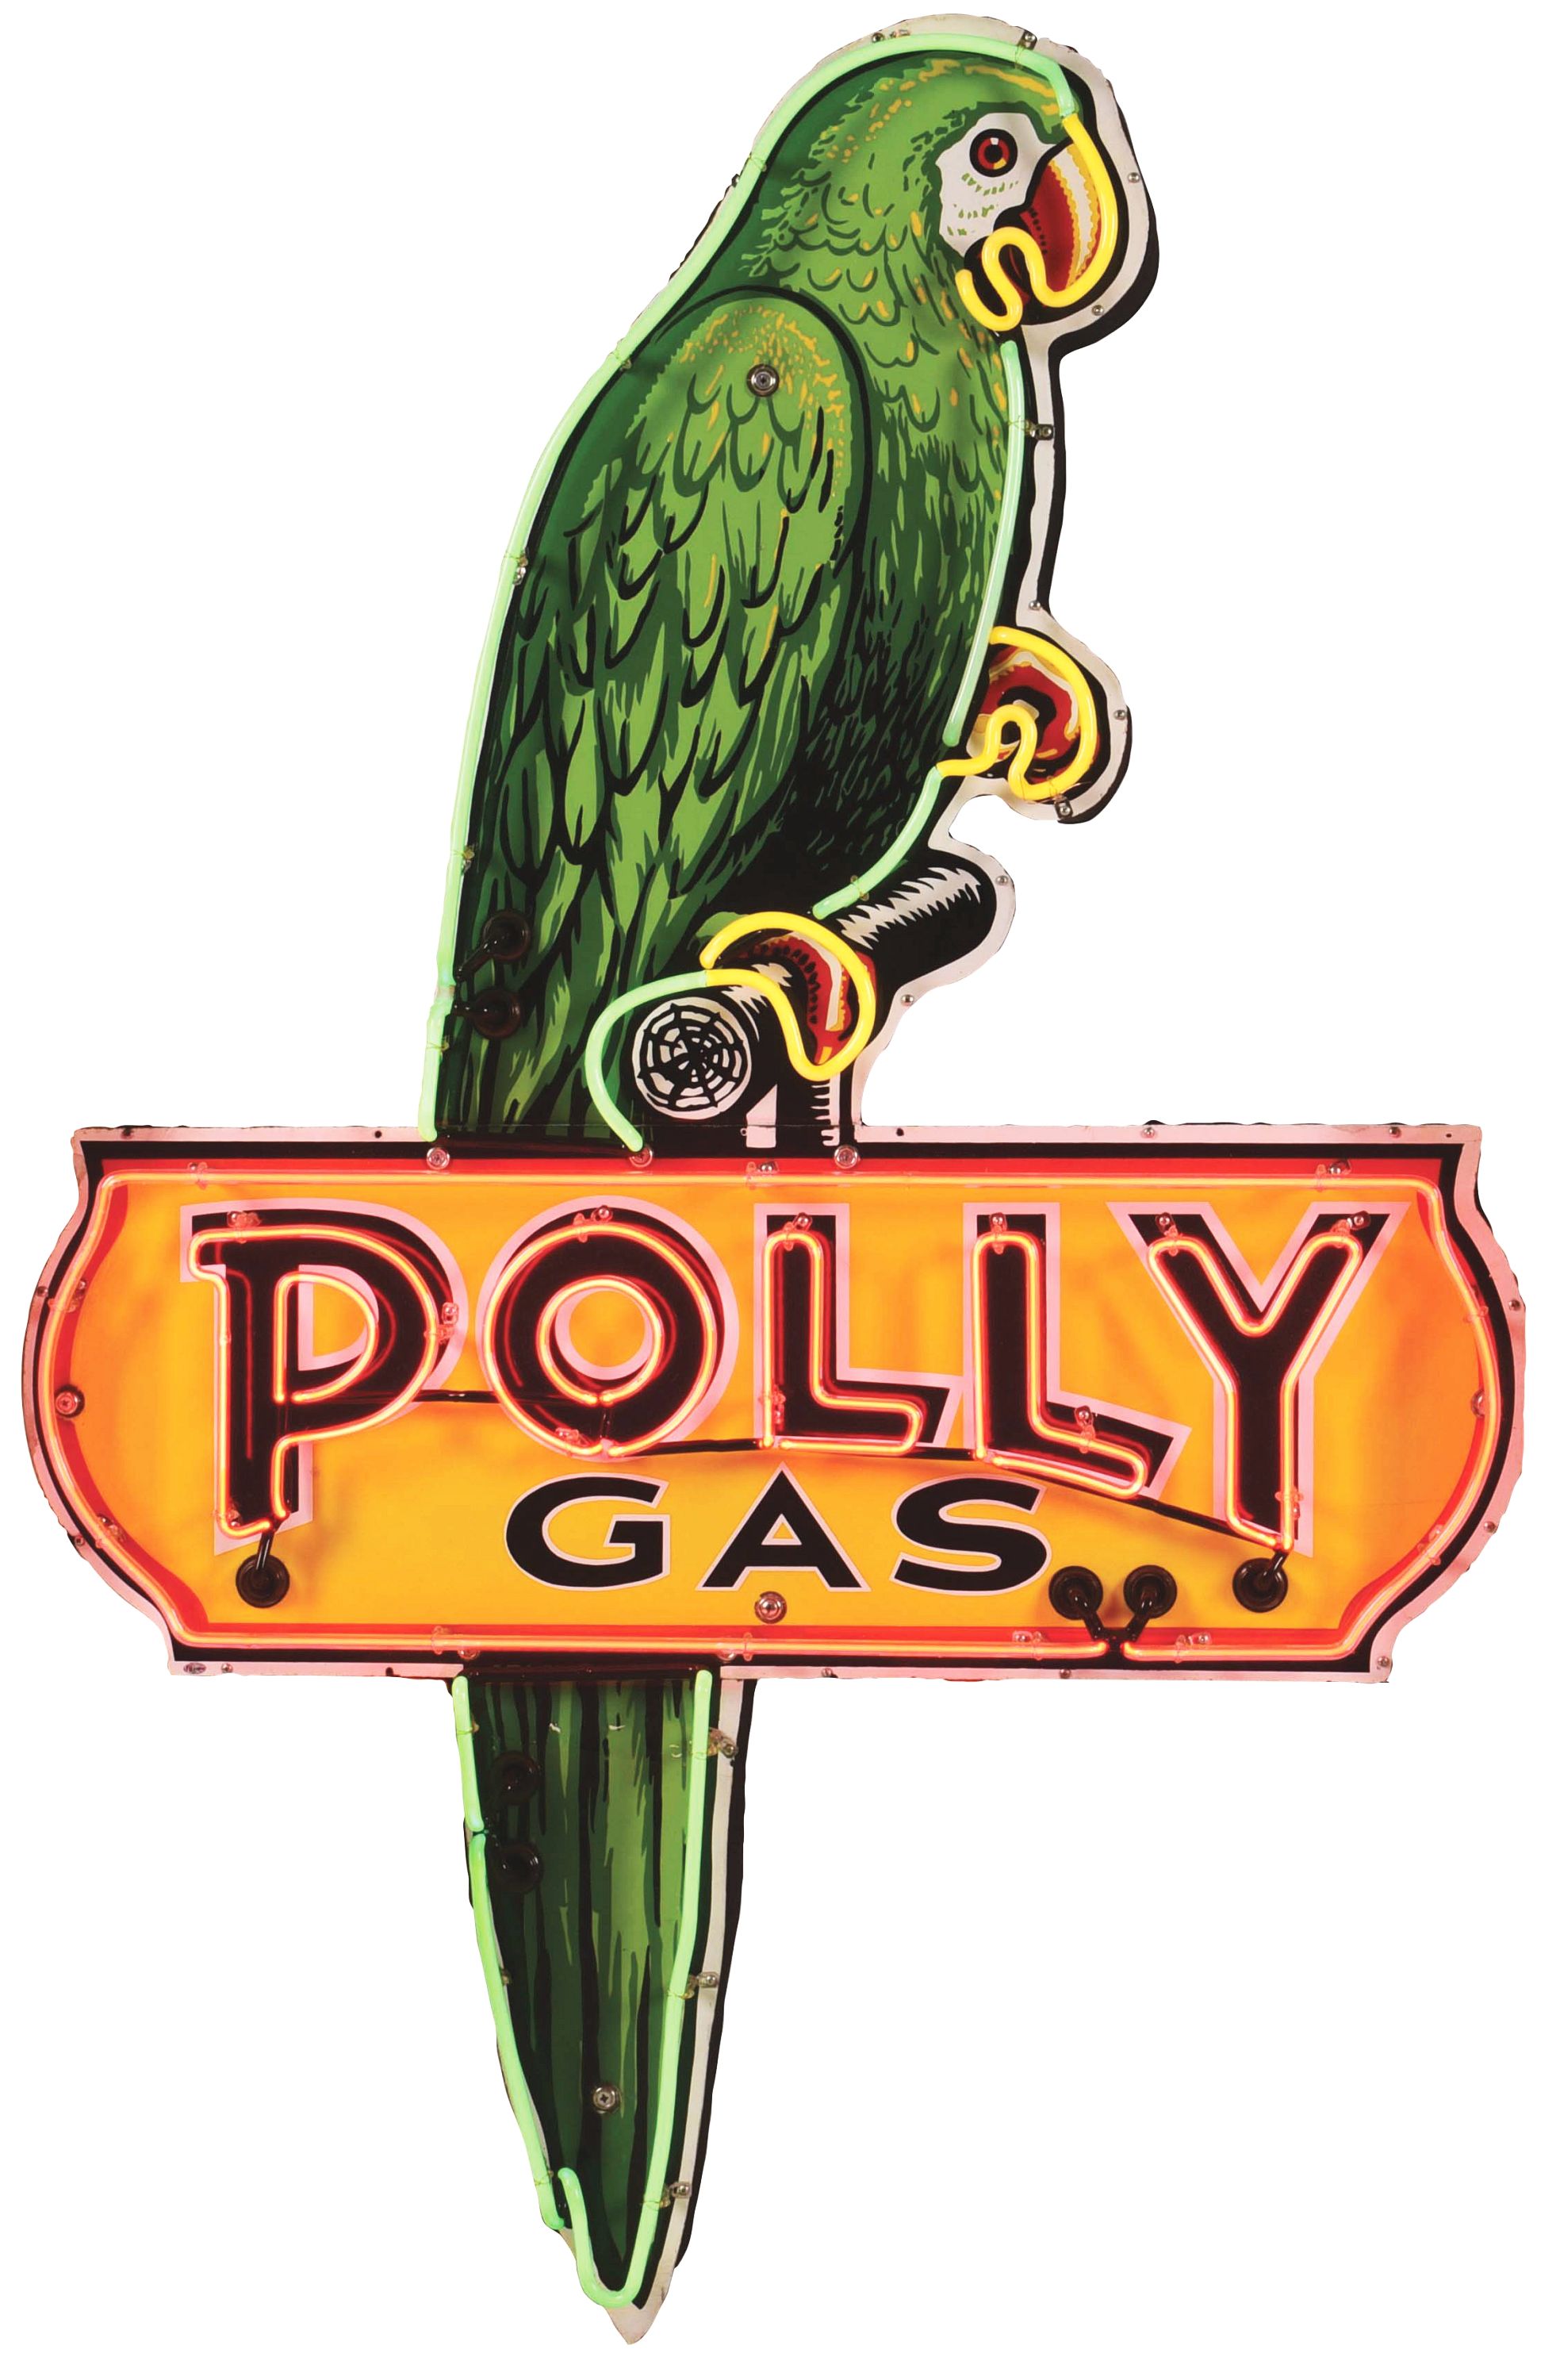 Polly Gas porcelain neon sign, estimated at $60,000-$100,000 at Morphy.
